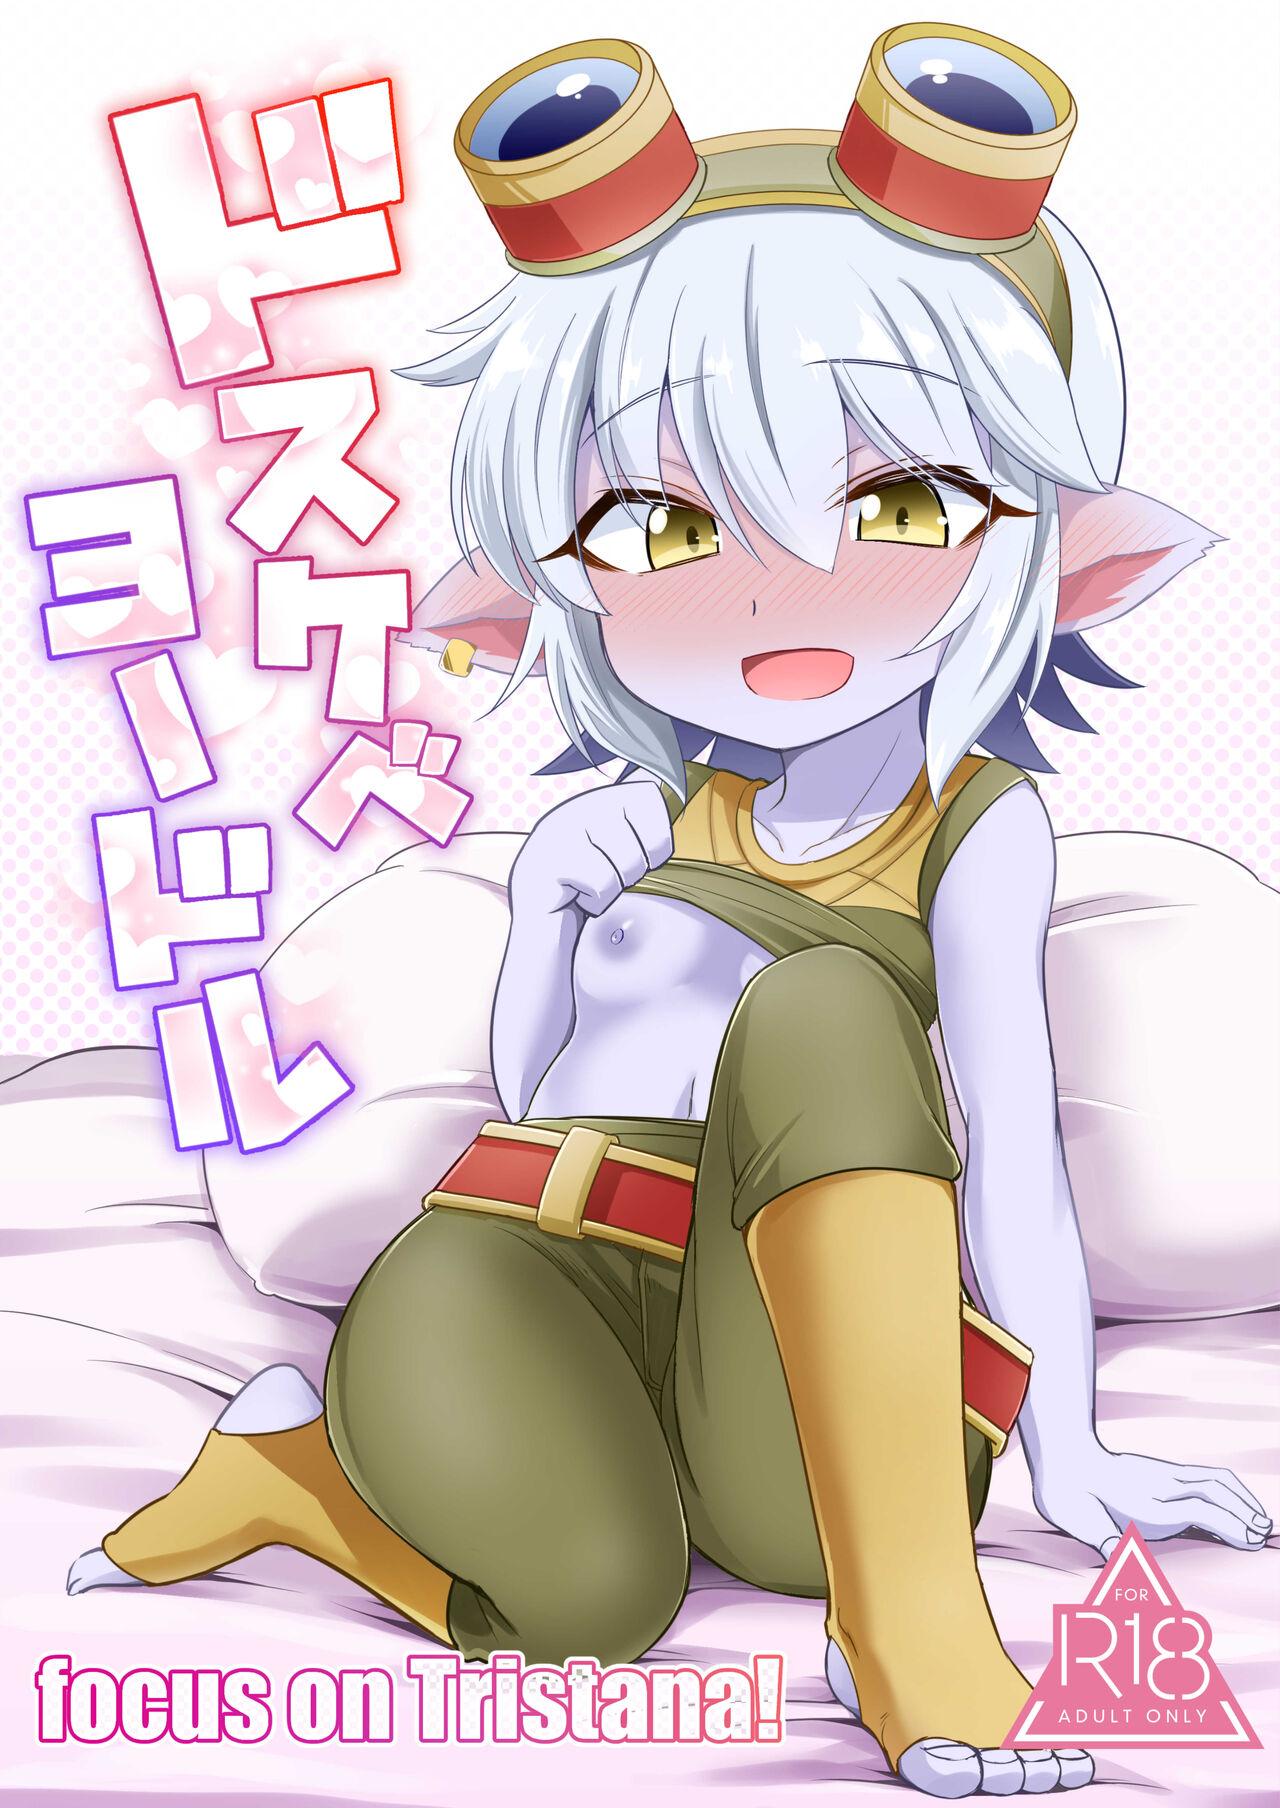 Letsdoeit Dosukebe Yodle focus on tristana! - League of legends Girl Get Fuck - Page 1